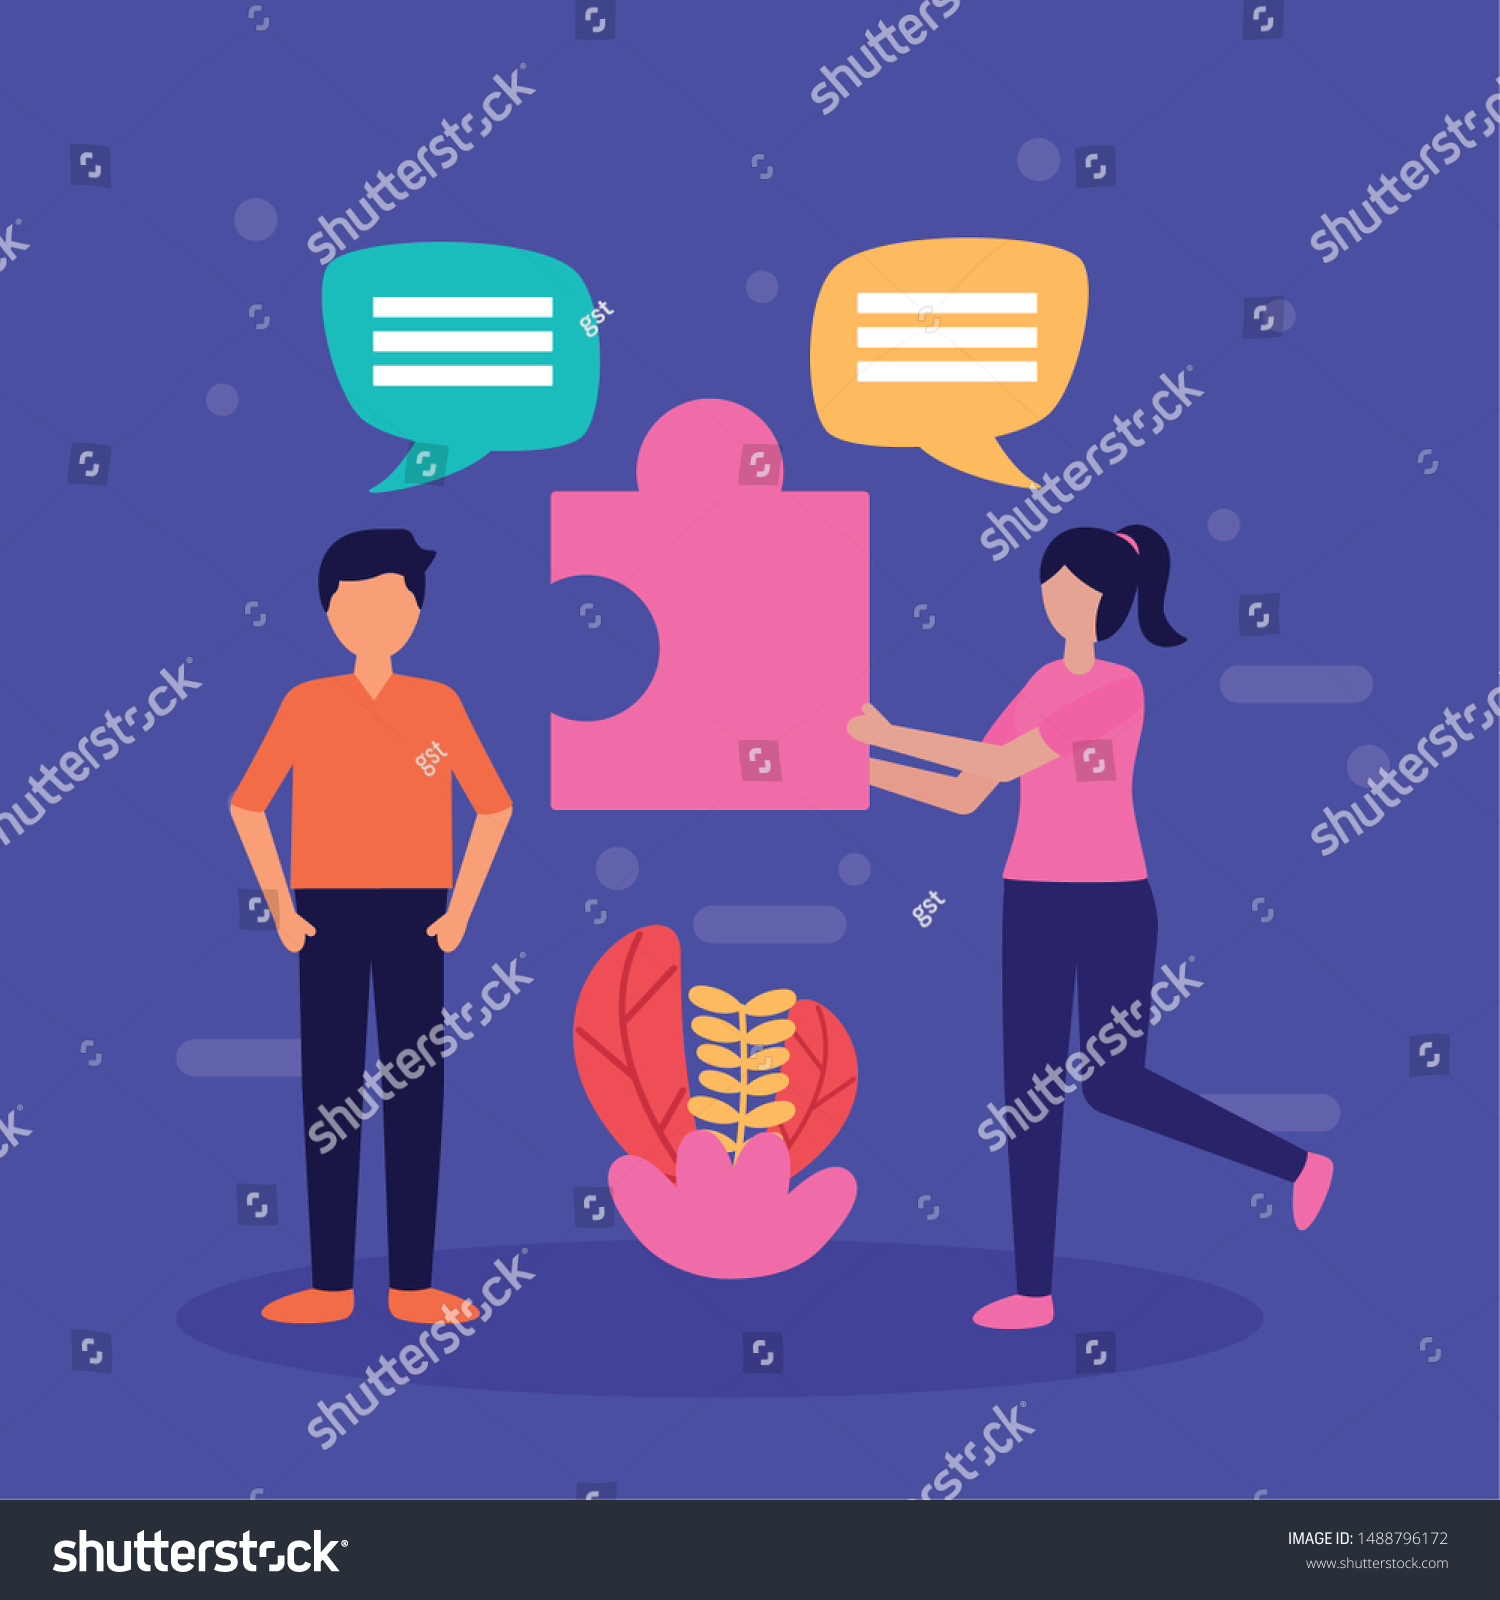 Man Woman Talking Puzzle Solution Teamwork Stock Vector Royalty Free 1488796172 Shutterstock 8941